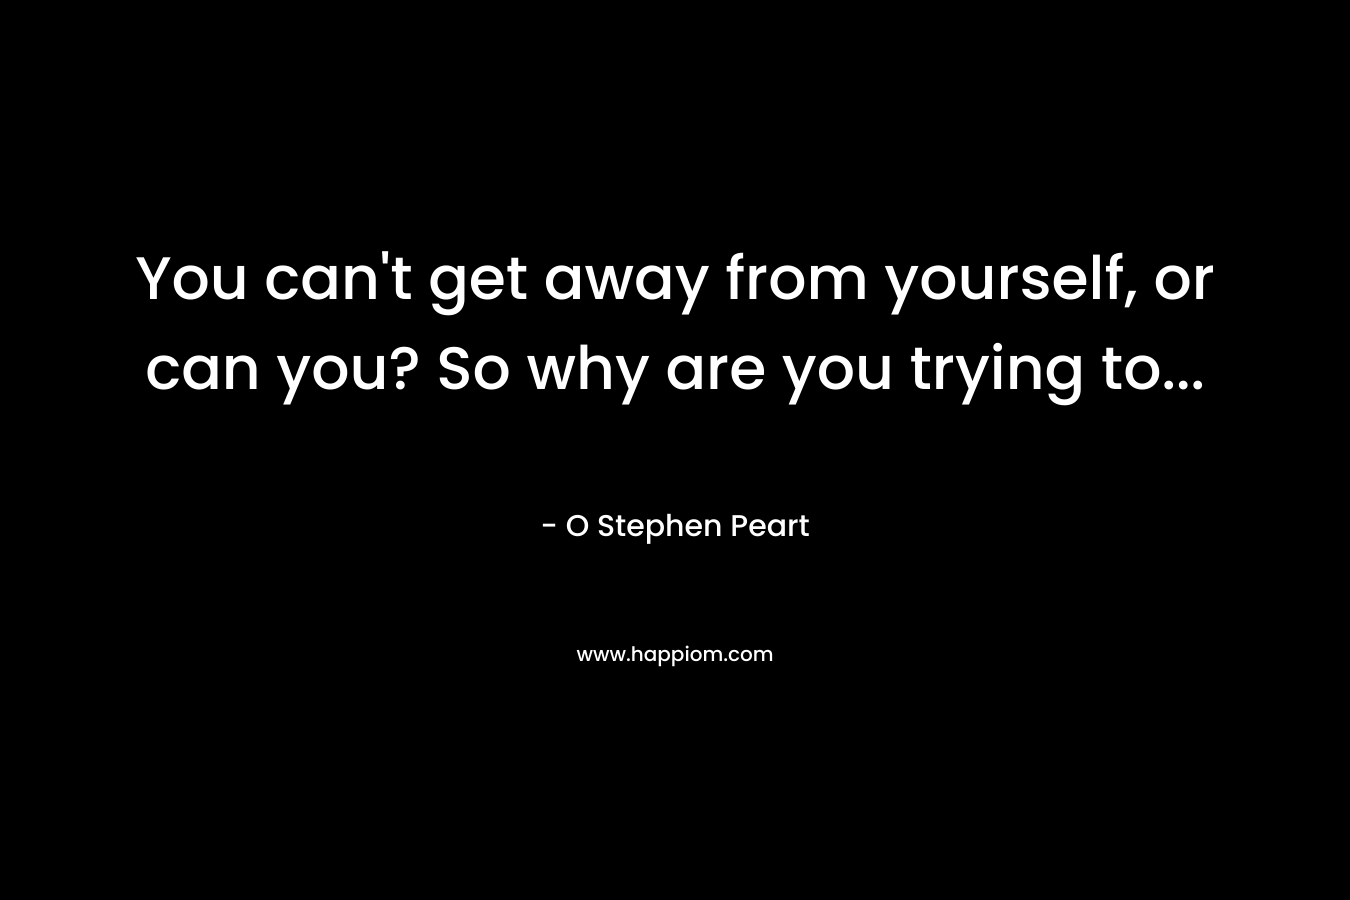 You can't get away from yourself, or can you? So why are you trying to...